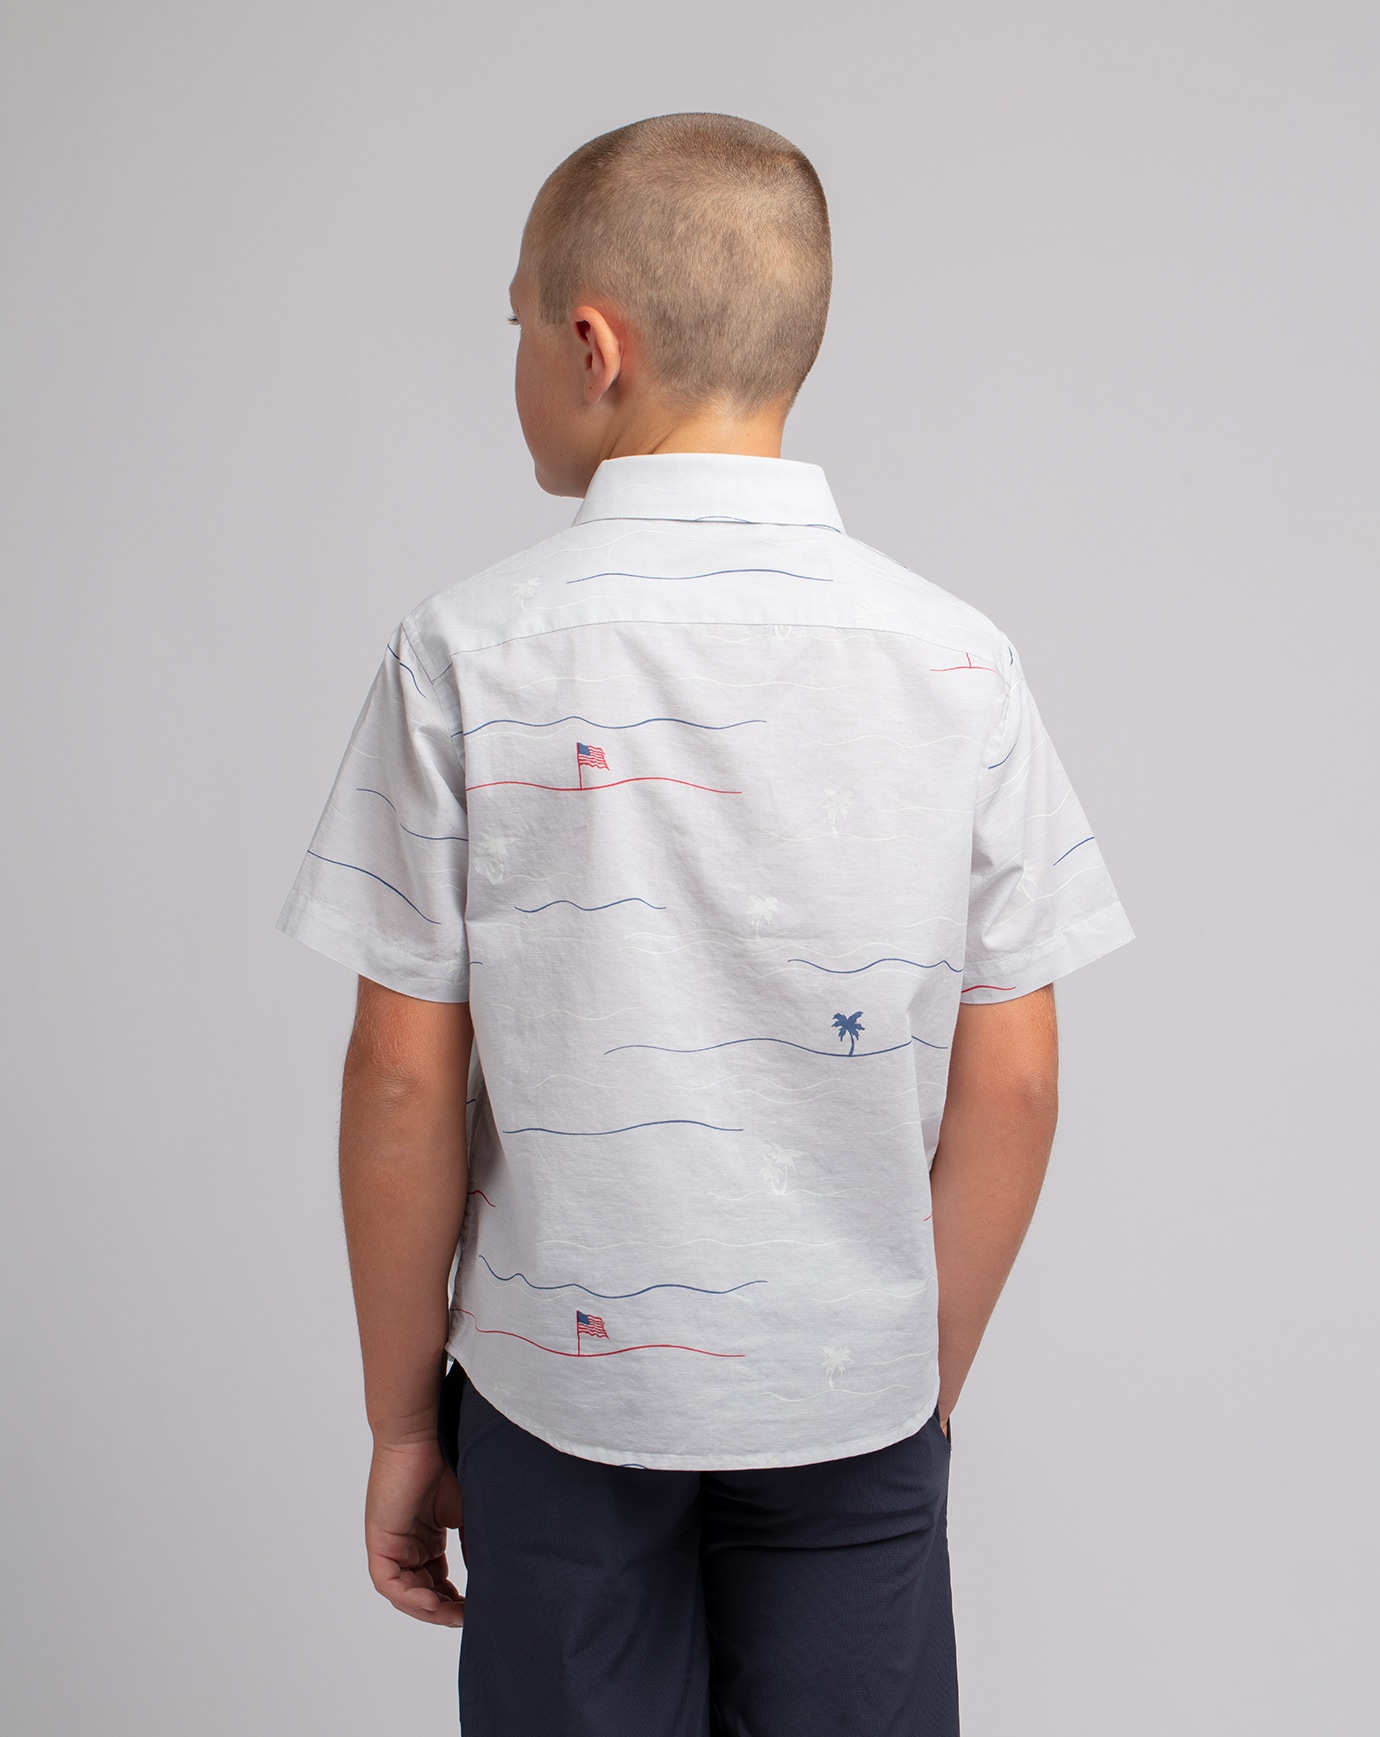 STAR SPANGLED BANNER YOUTH BUTTON-UP Image Thumbnail 3